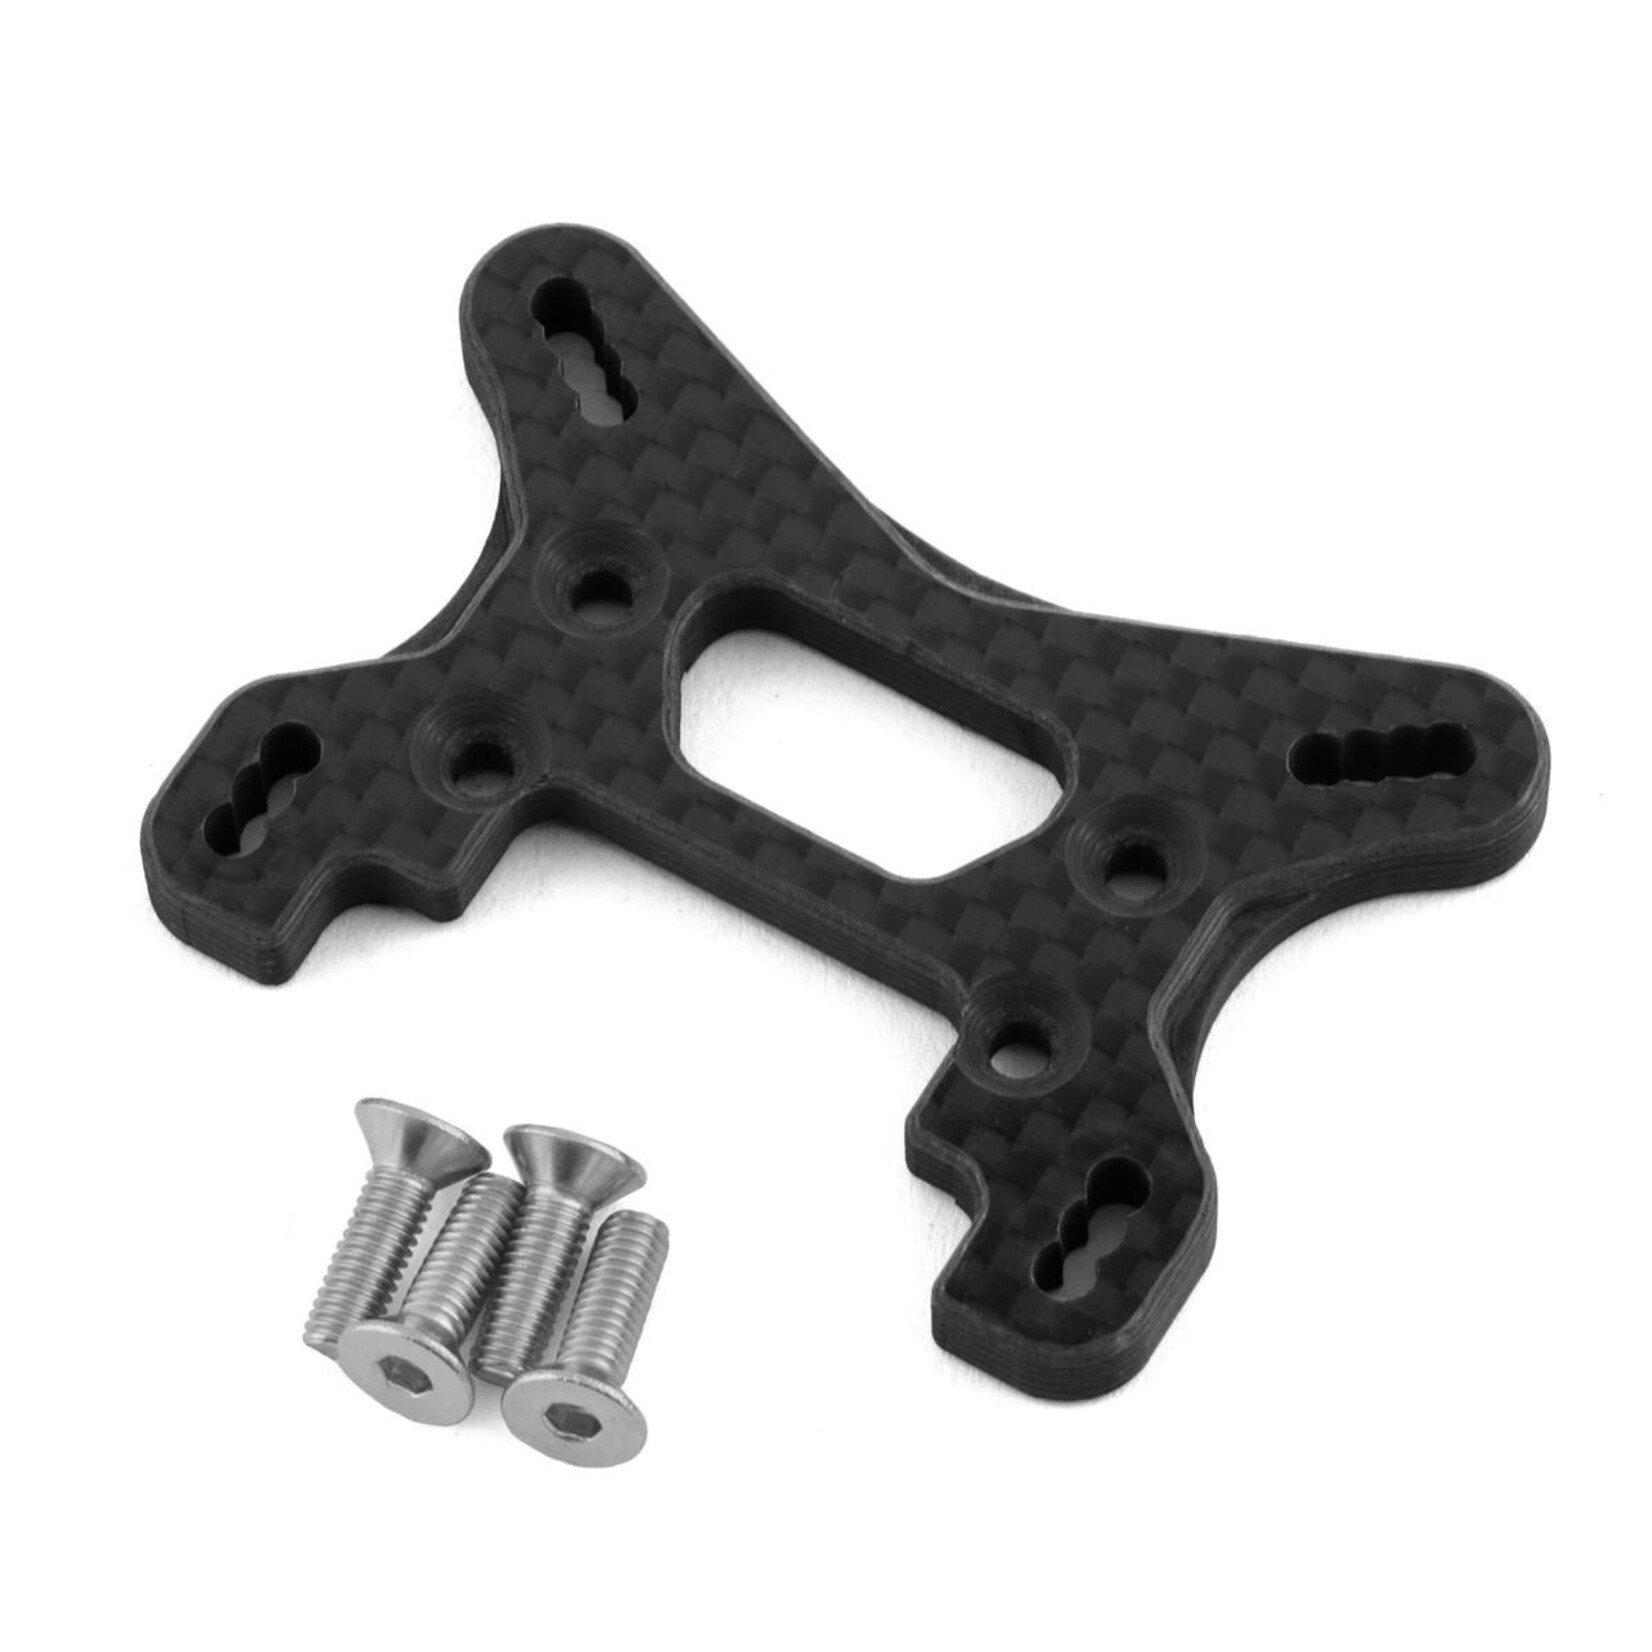 Vision Racing Vision Racing TLR 22X-4 Carbon Fiber Front Shock Tower (-2mm) w/Plus One Camber Hole #00225